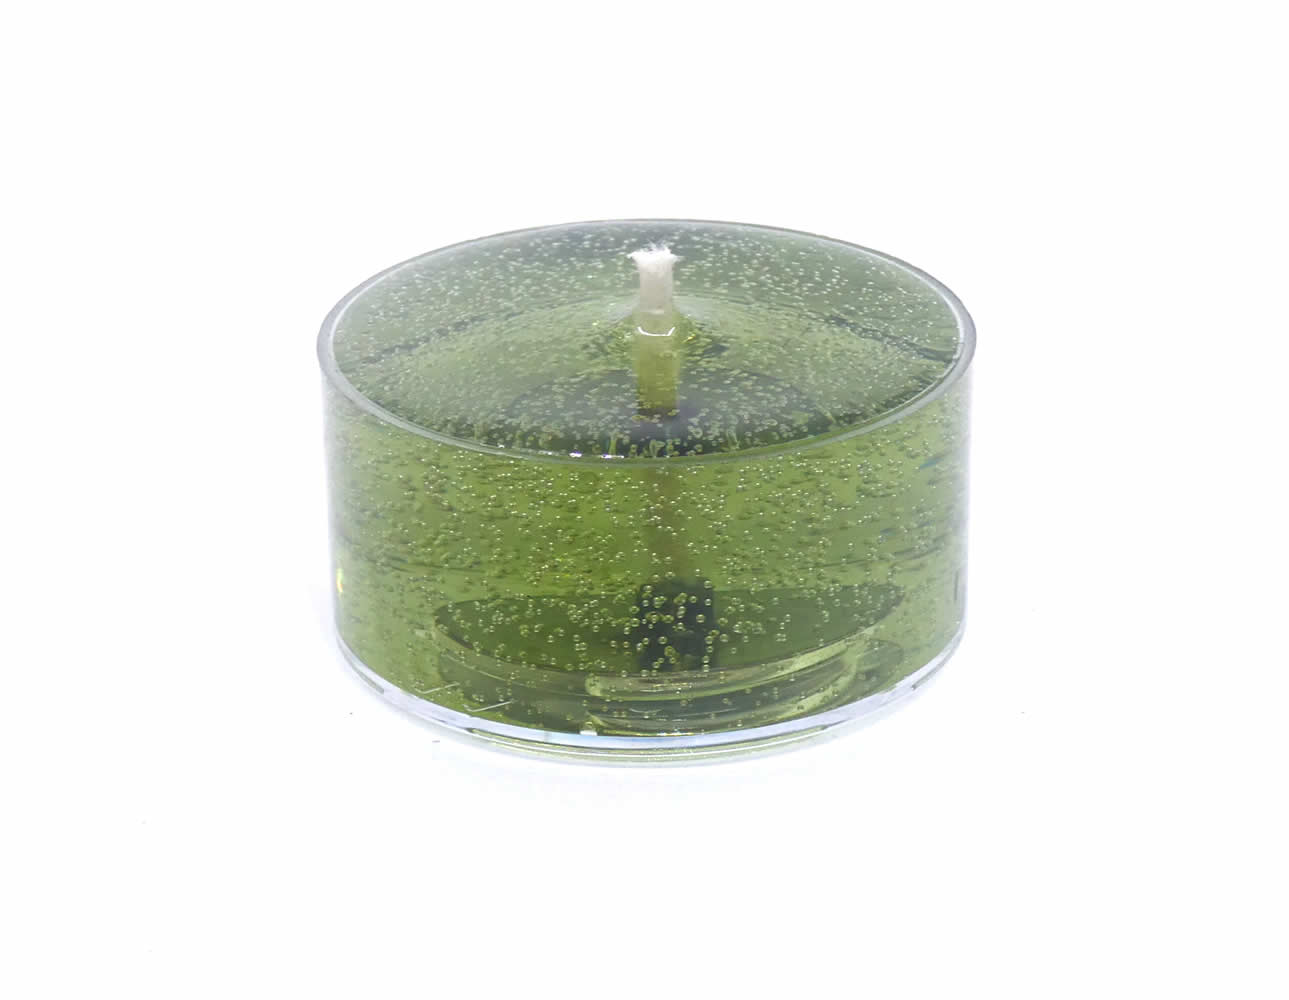 Patchouli Scented Gel Candle Tea Lights - 4 pk. - Click Image to Close